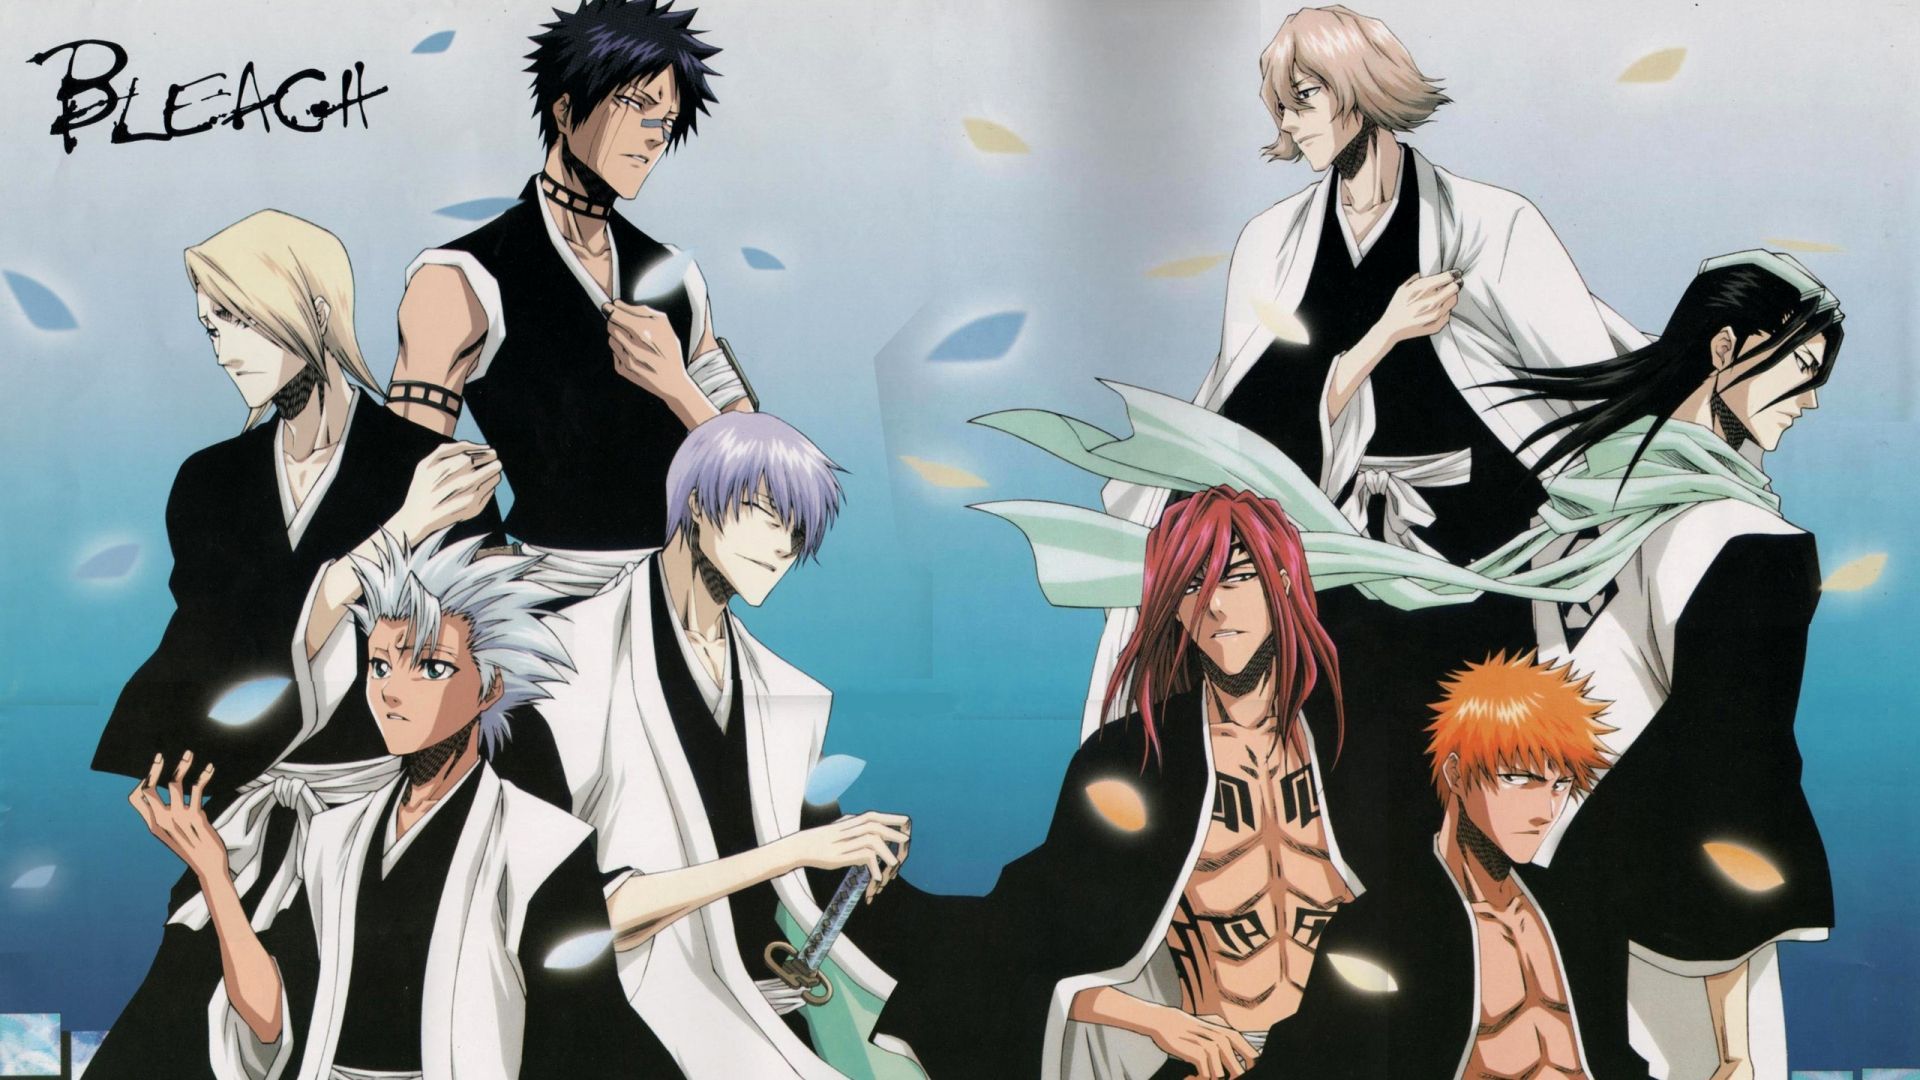 Download Bleach Characters Anime Wallpaper 1920x1080 Full HD